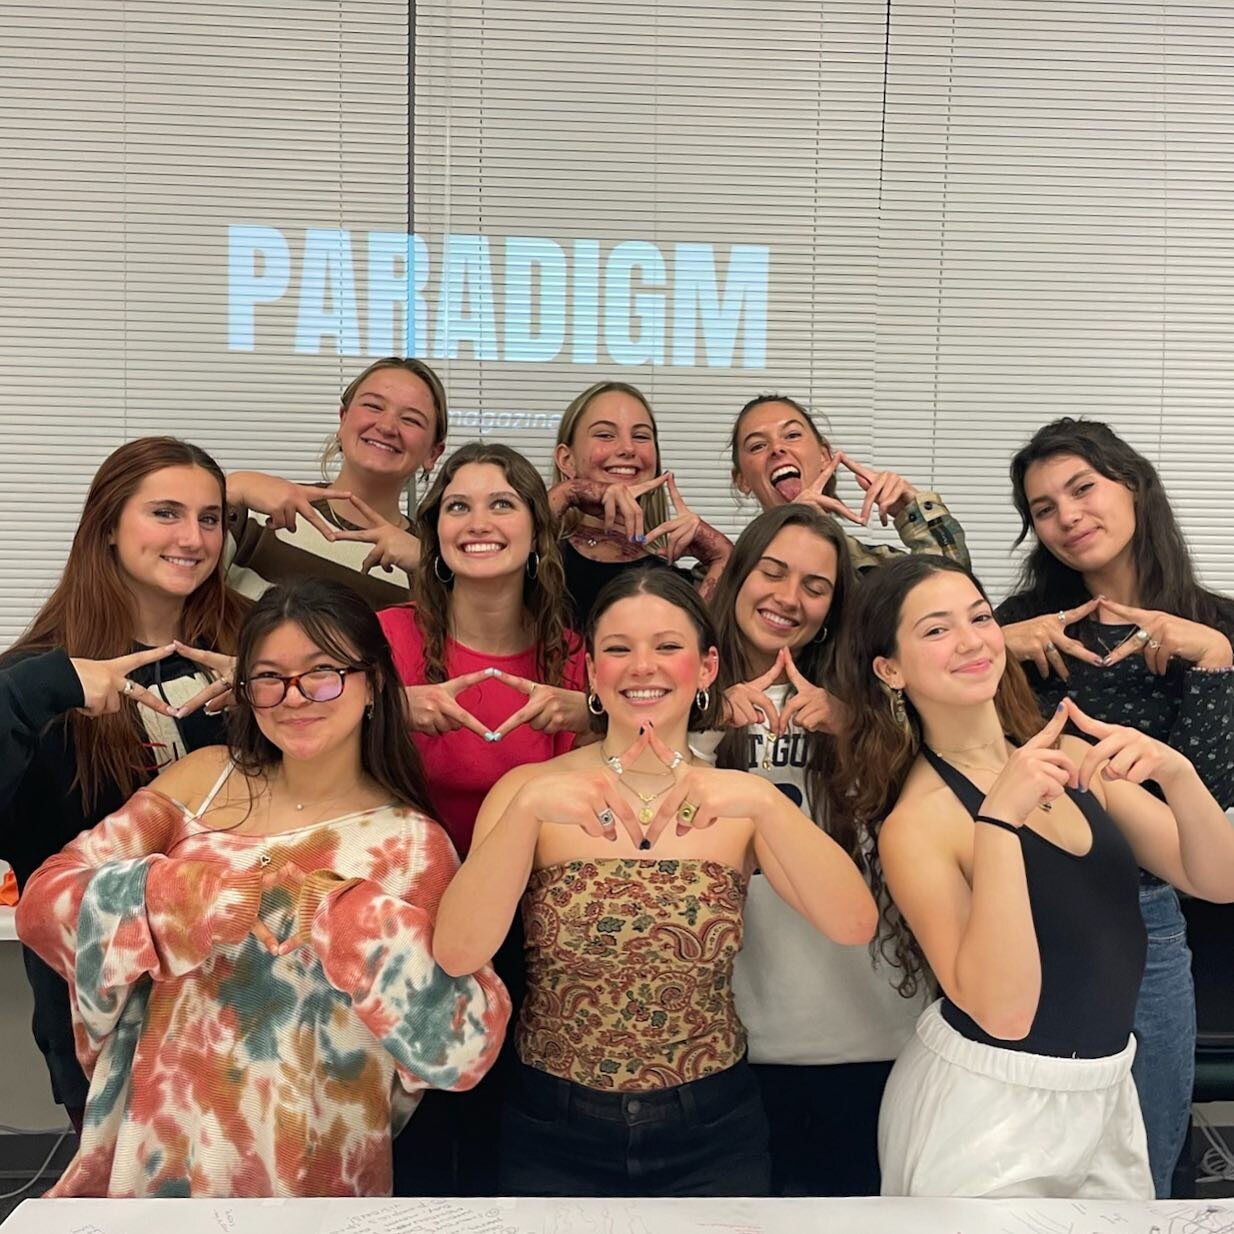 PARADIGM ✦ MAGAZINE&rsquo;s FIRST MEETING!!! Thank you to everyone who came to create! 

If you didn&rsquo;t make it, but still want to be a part of PARADIGM make sure to fill out our application!! Link in bio &amp; on our story!!

✦ PARADIGM ✦